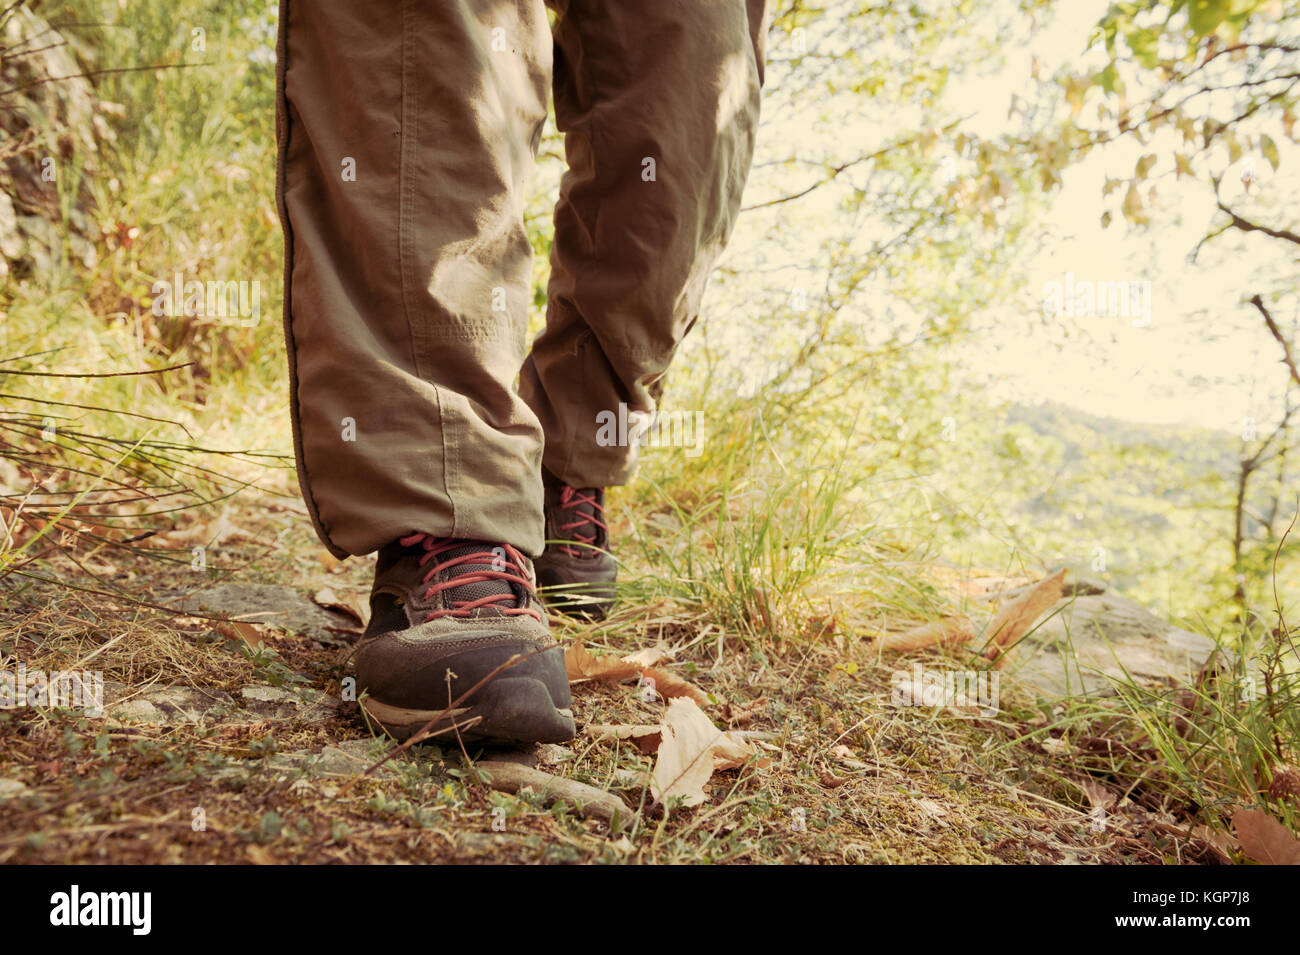 Hiking shoes with red laces and legs wearing long brown trousers of an hiker walking on a path in the wood. Vintage effect Stock Photo